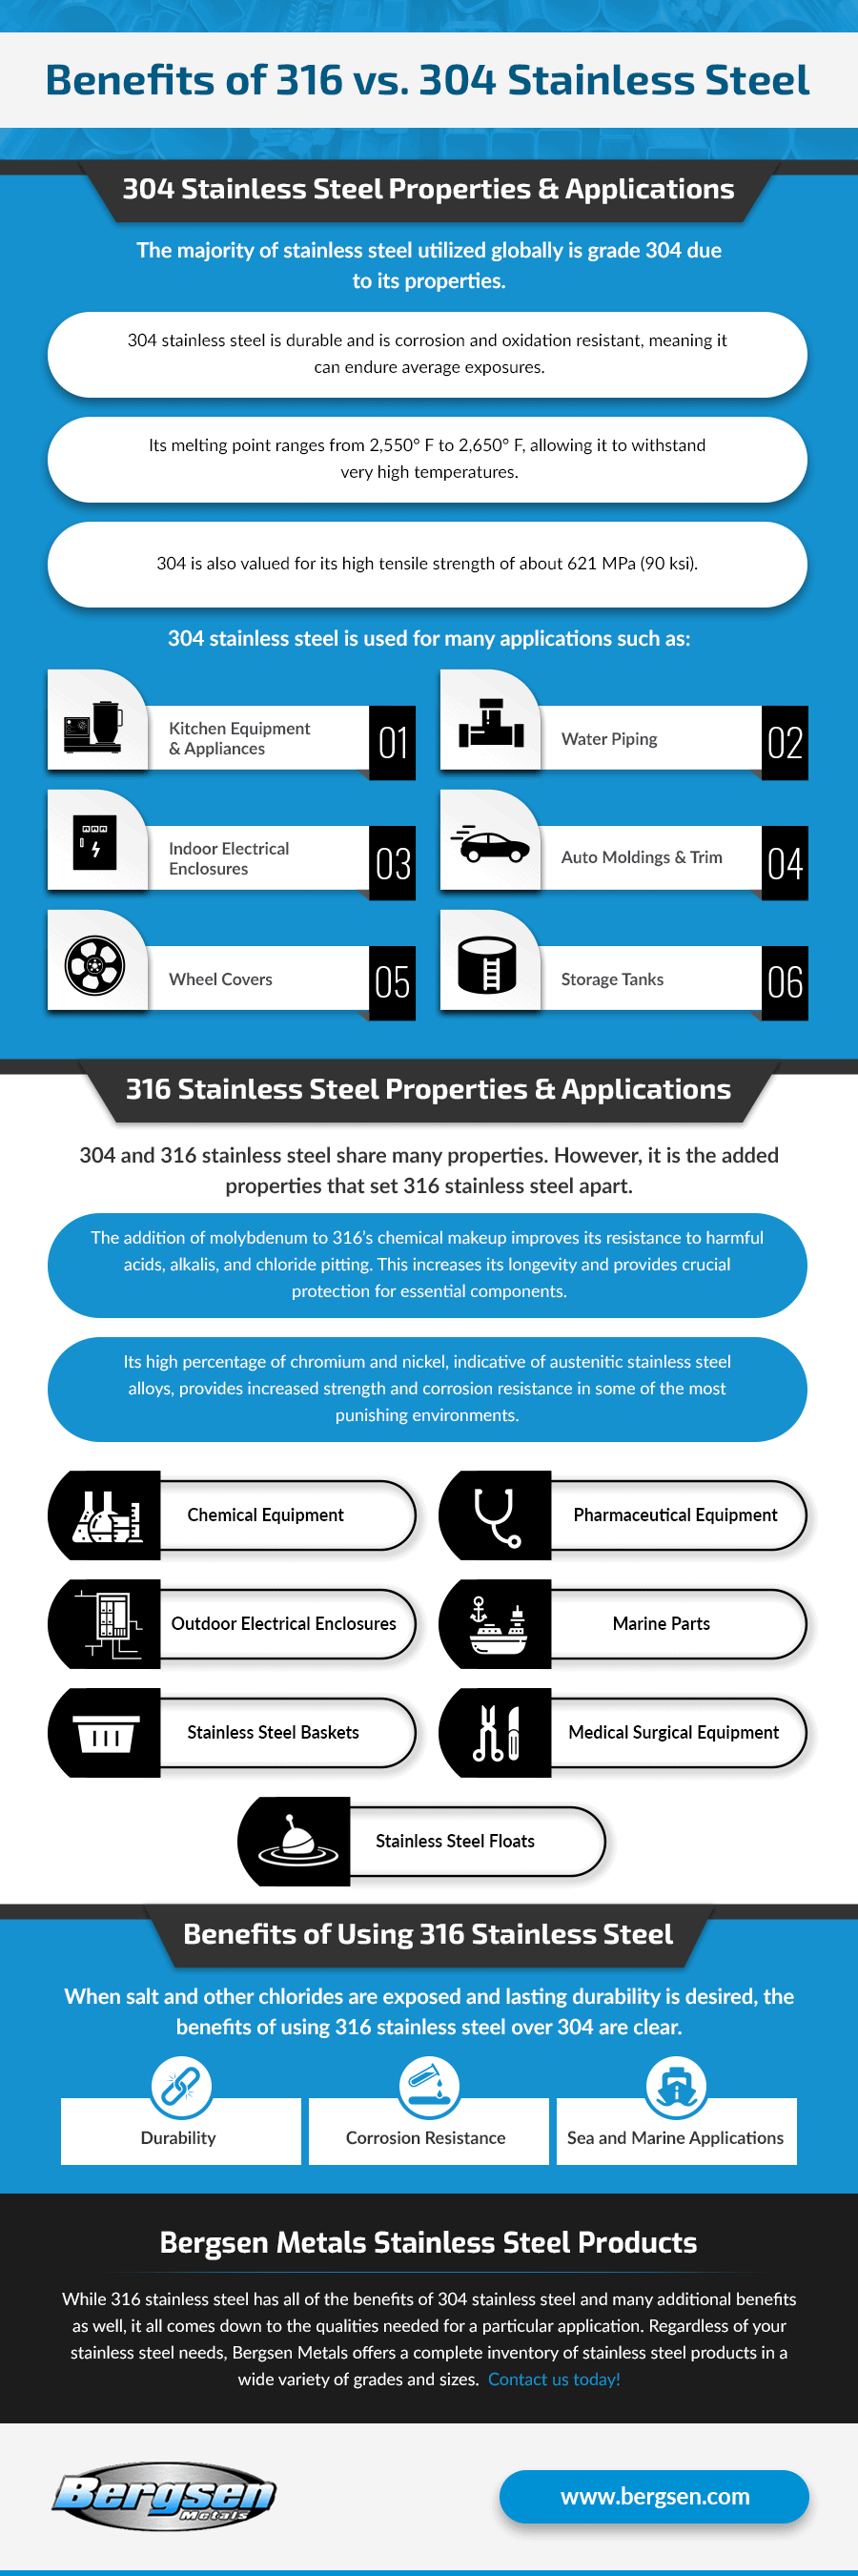 Benefits of 316 vs. 304 Stainless Steel